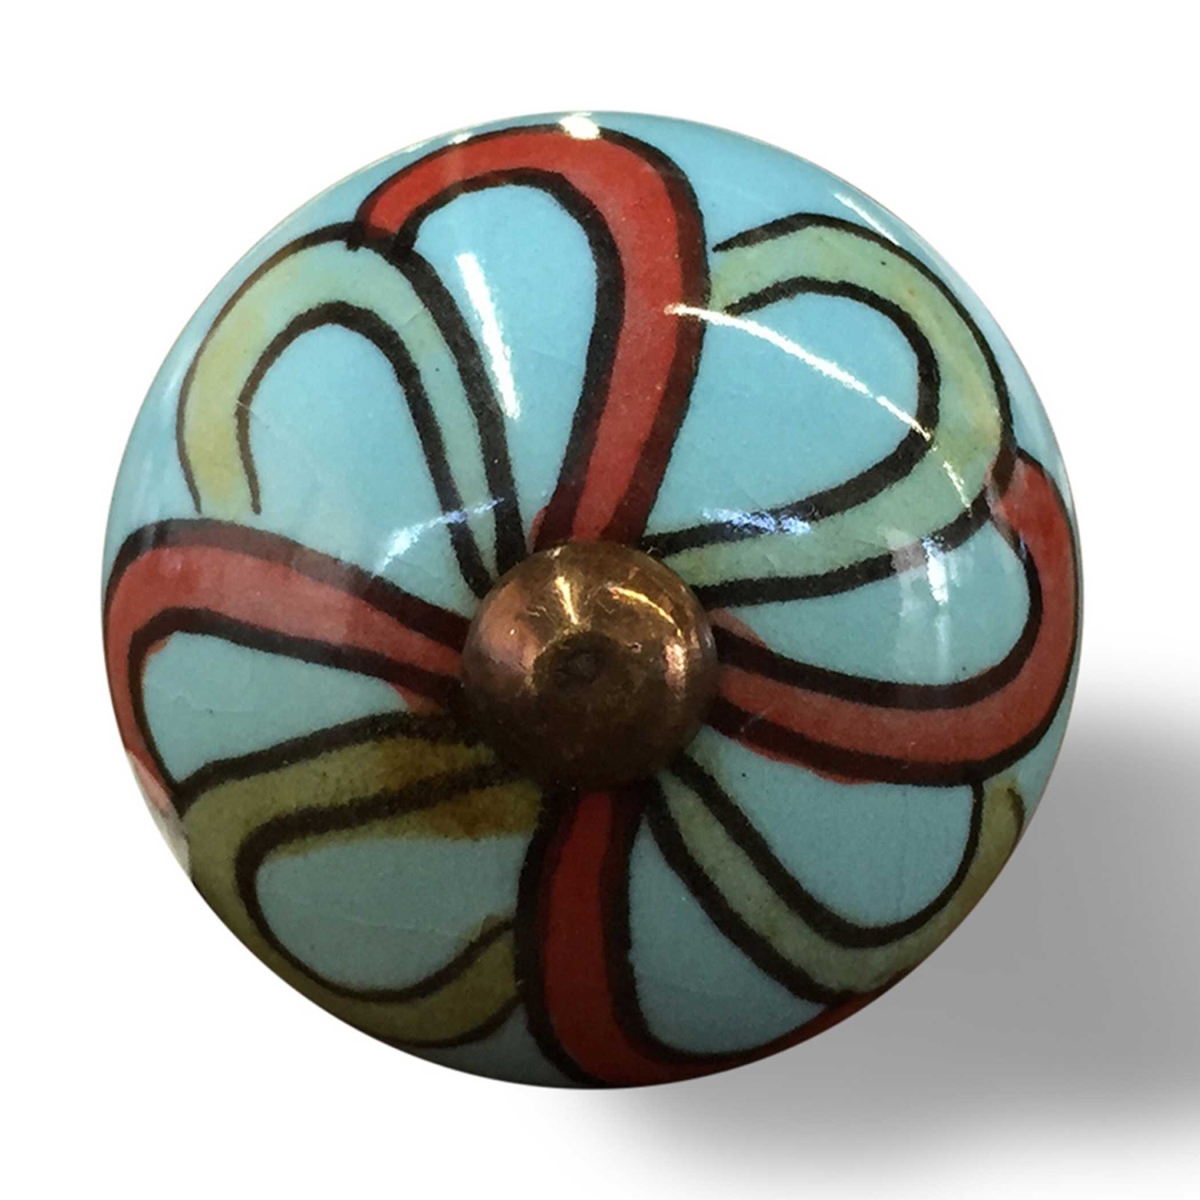 Home Roots Beddings 332350 Knob-it For K3521, Turquoise, Red & Green - Pack Of 8